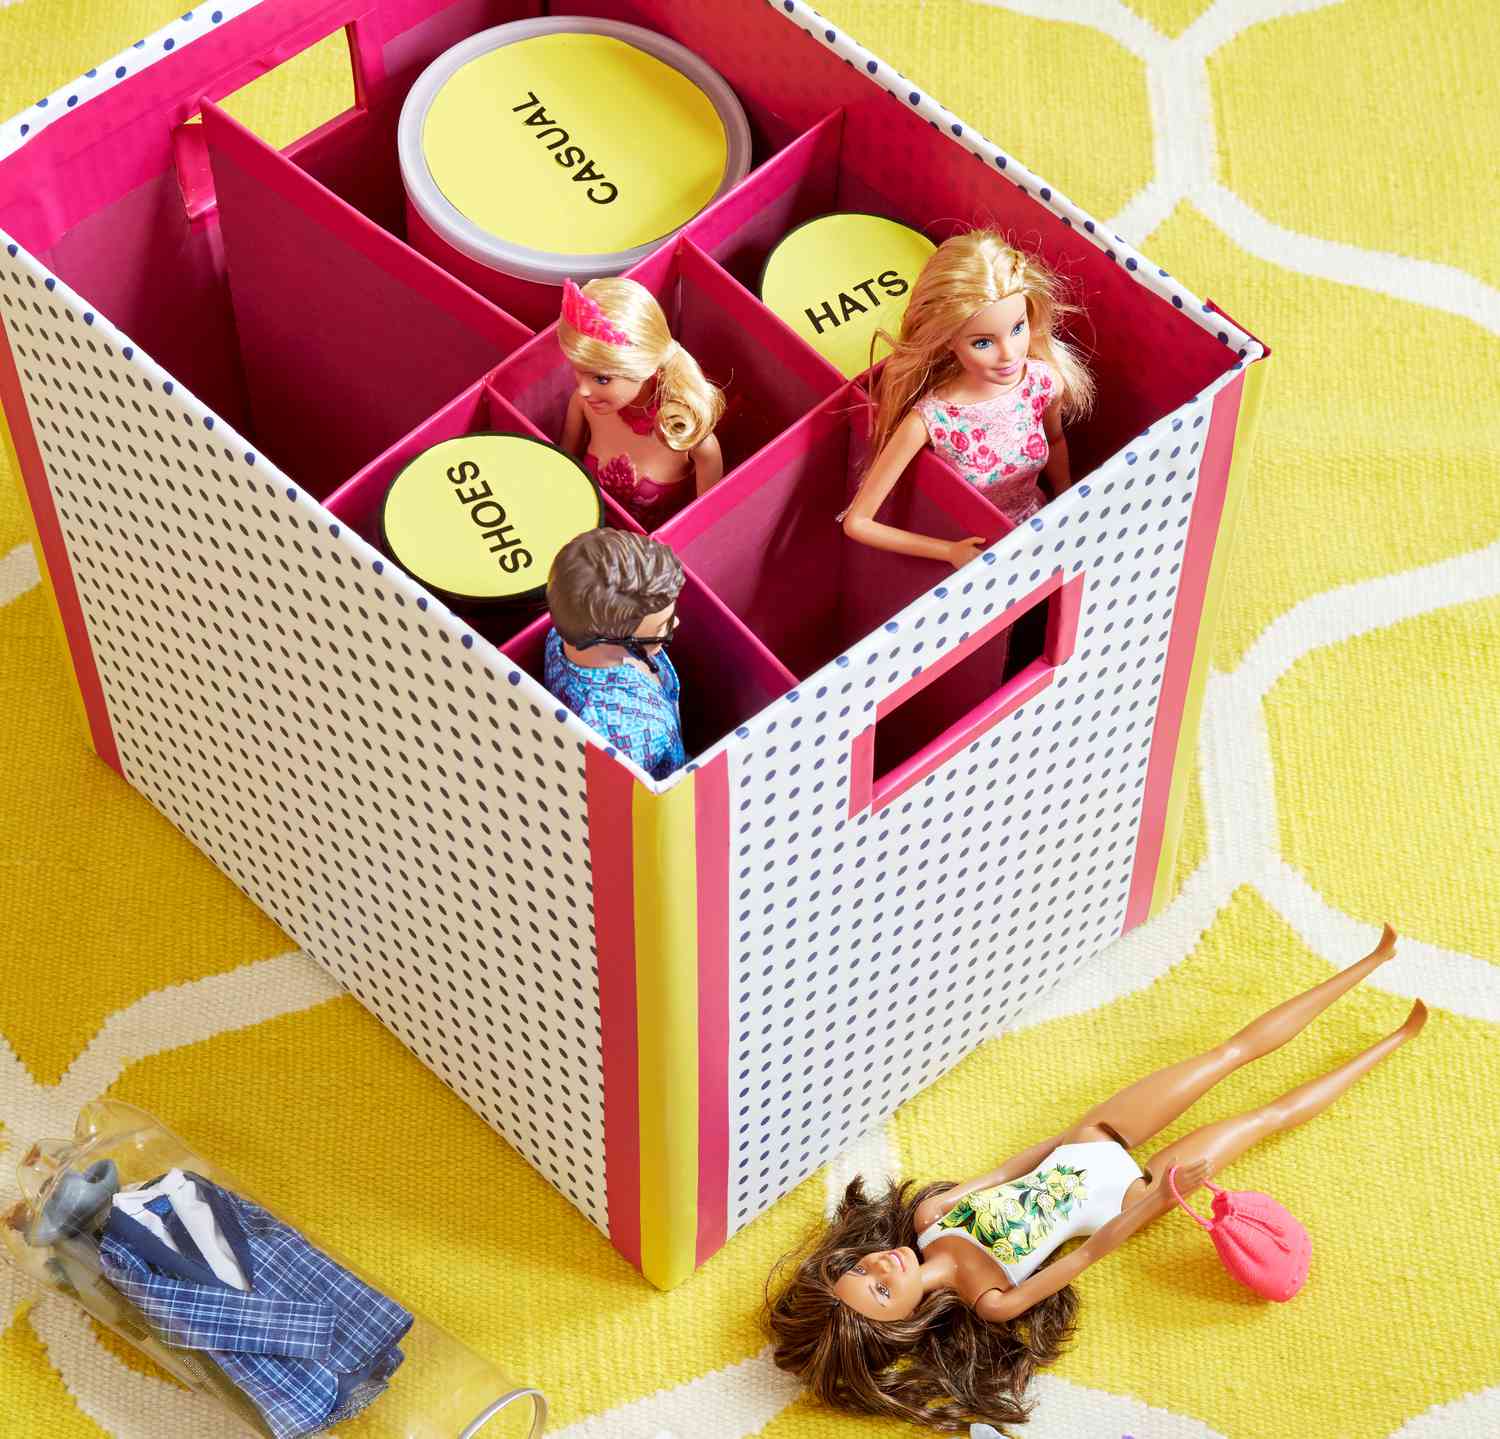 Barbie storage with compartments in a bin